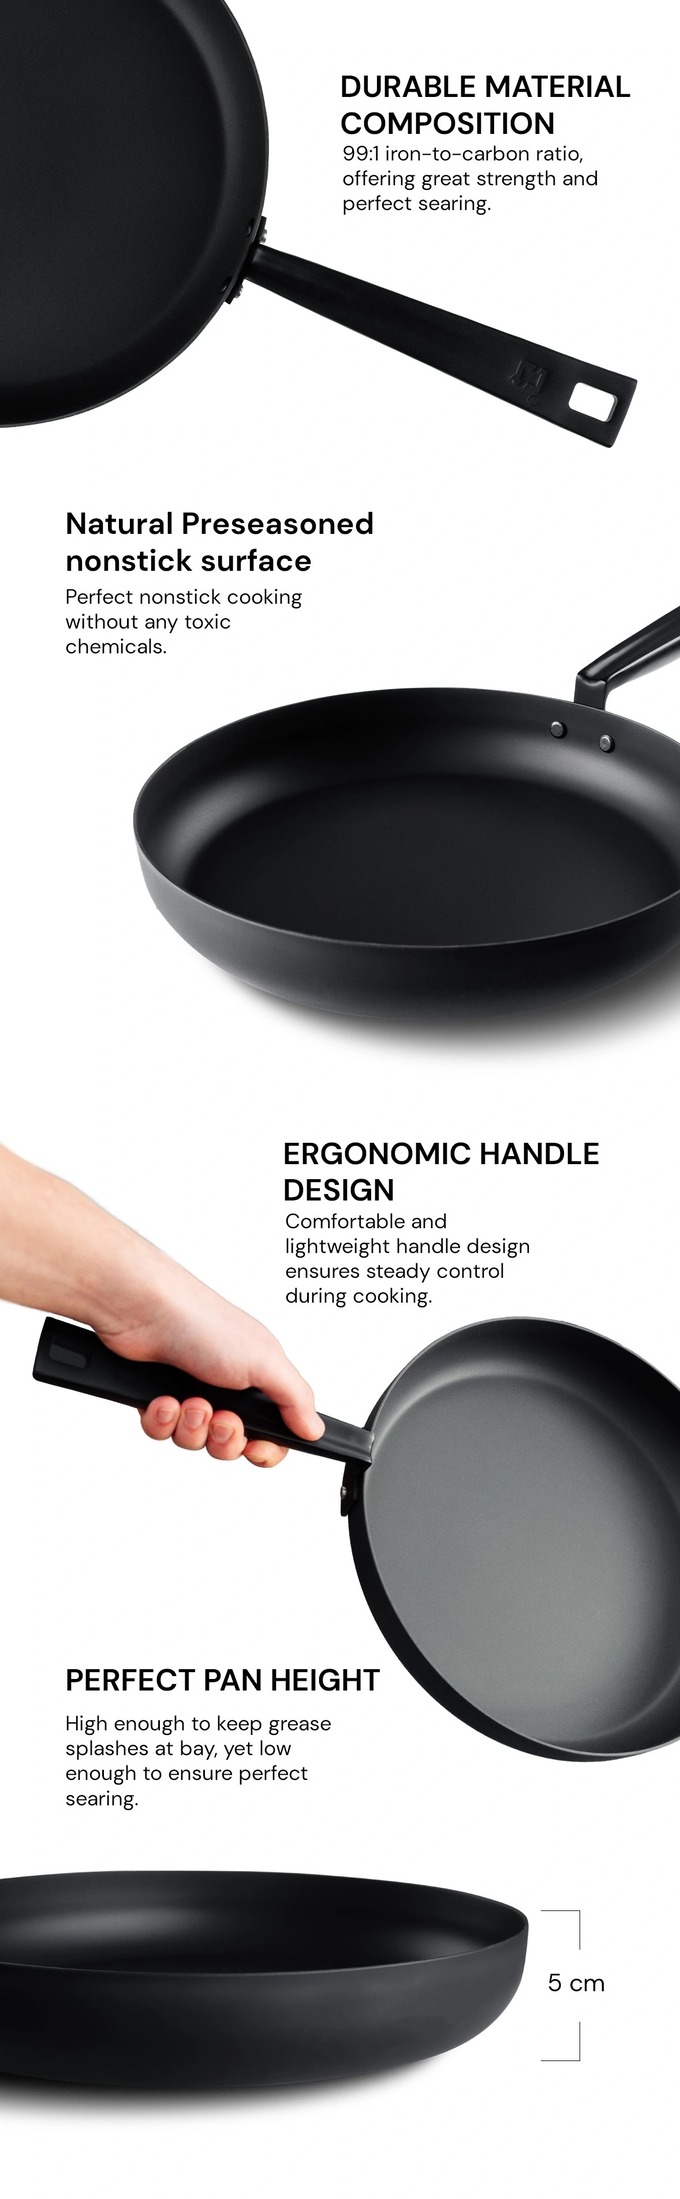 Many cool features of the carbon steel pan